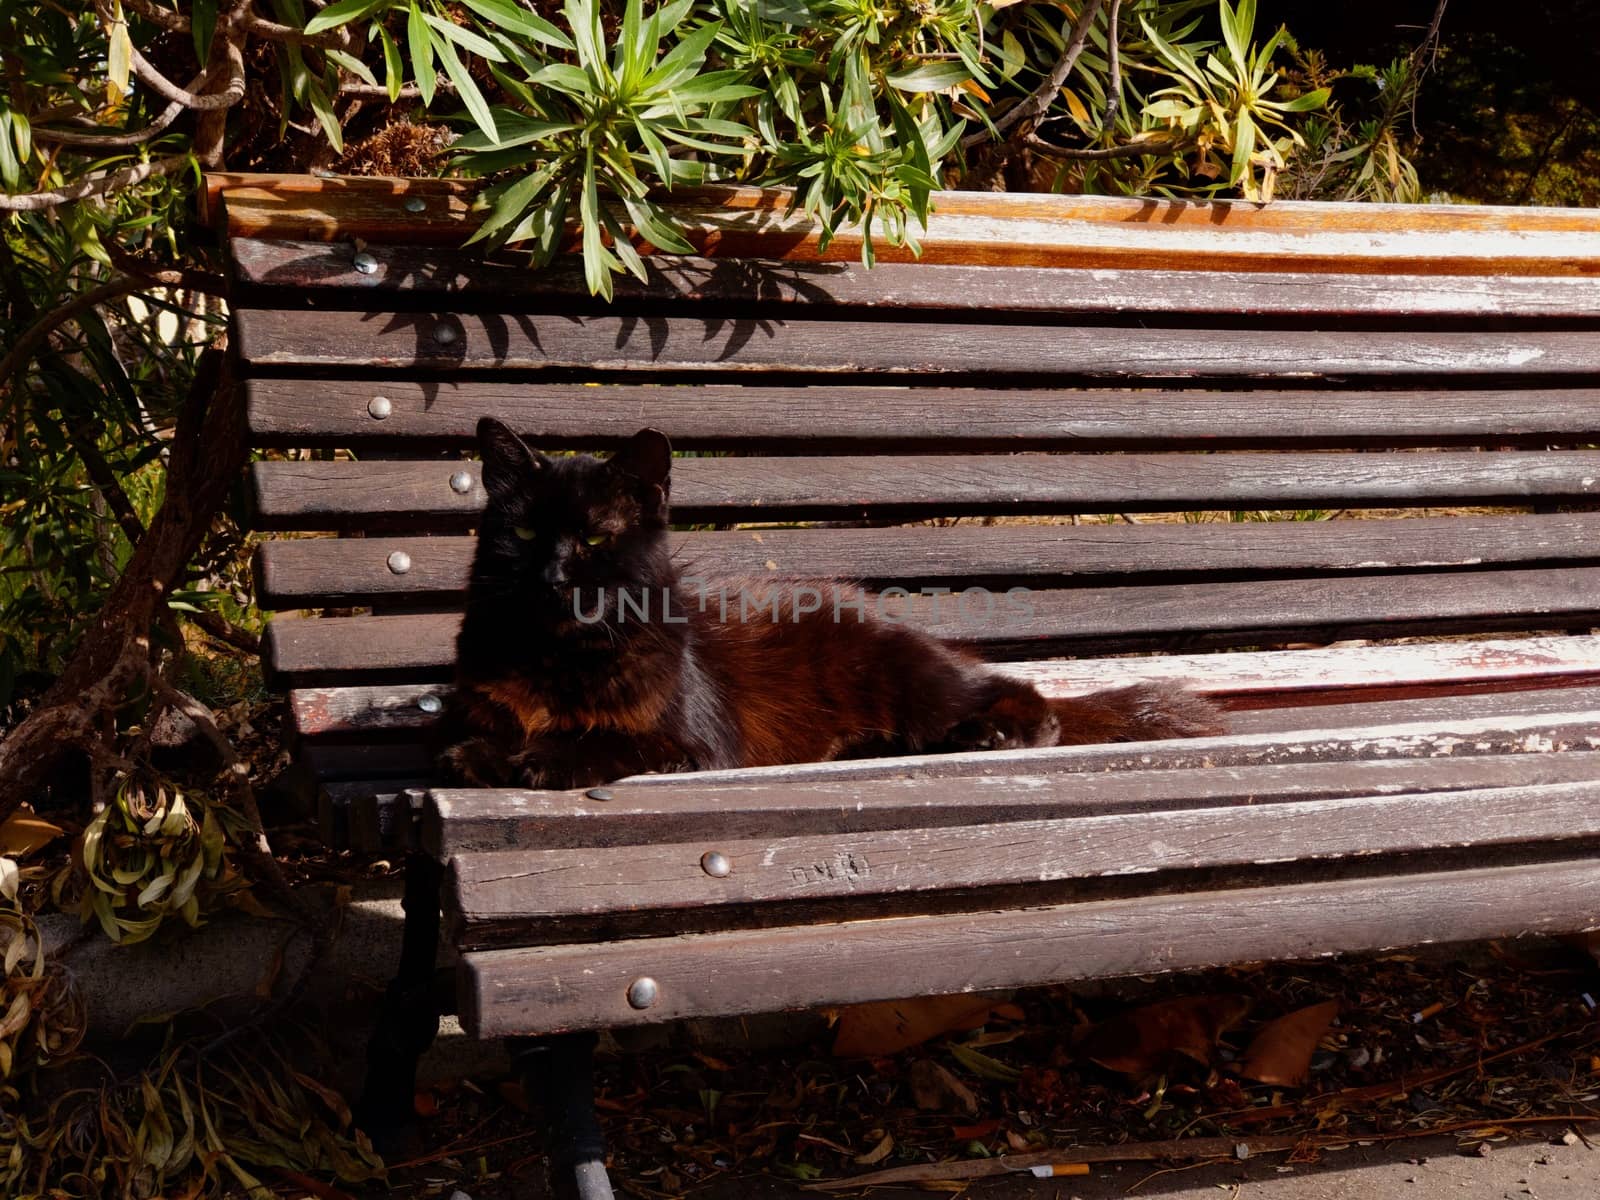 CAT SITTING ON A BENCH